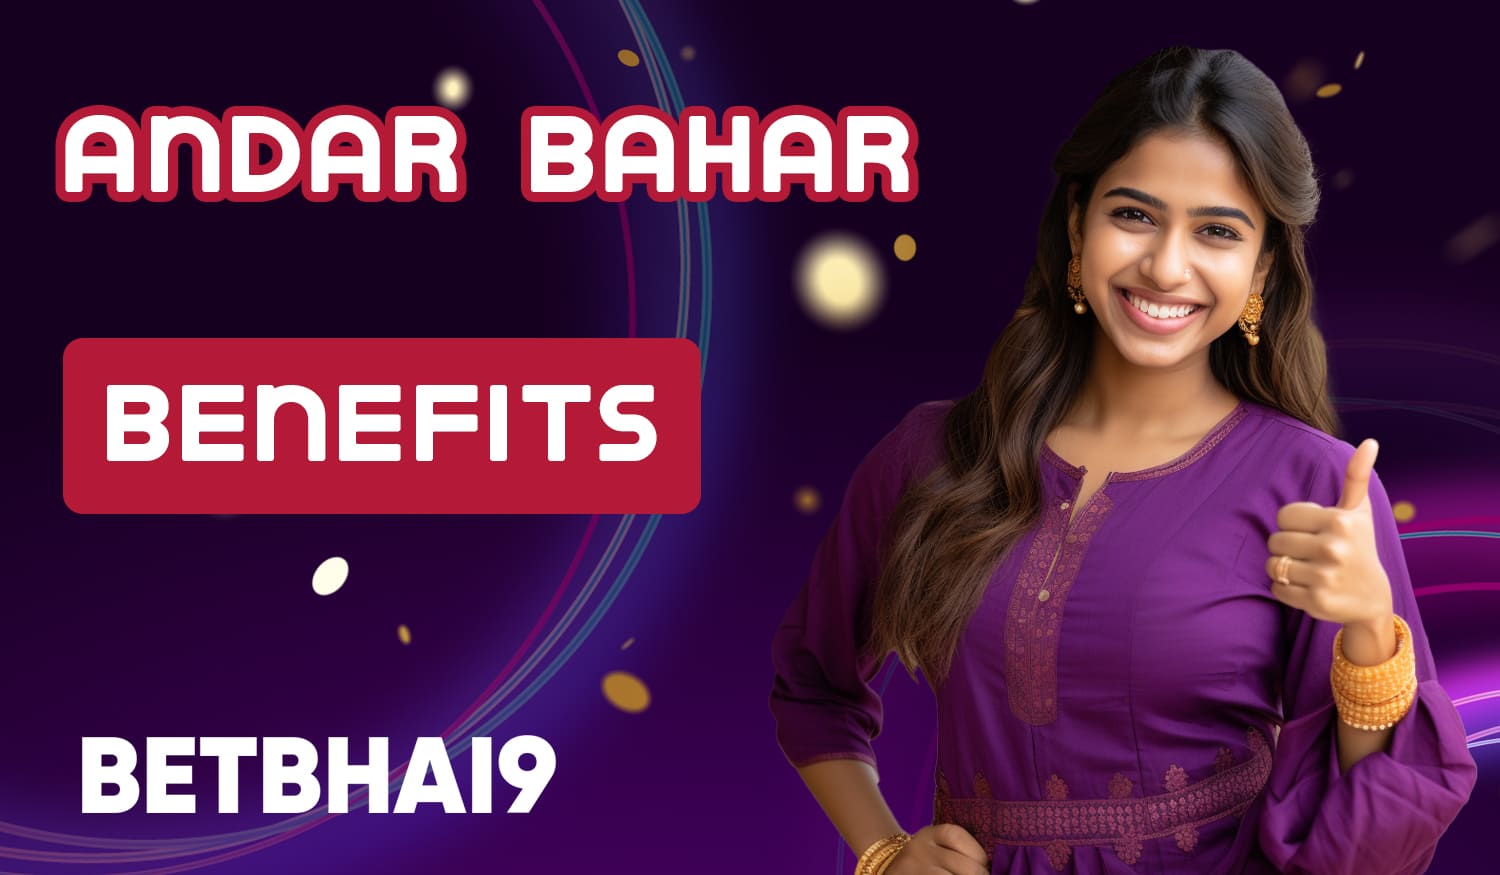 What are the benefits of playing Andar Bahar on Betbhai9 casino website